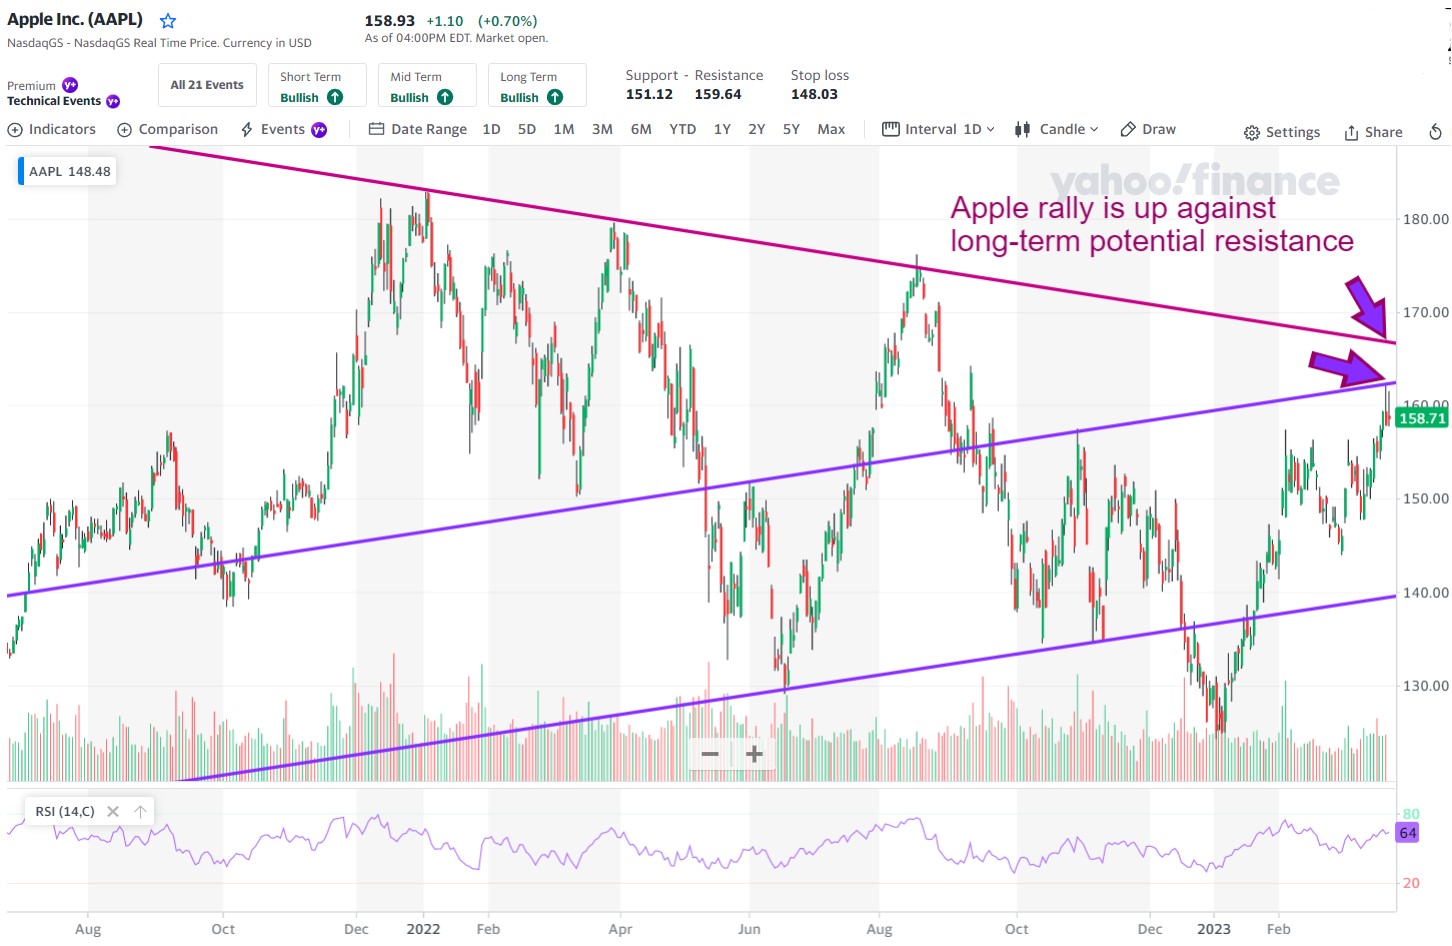 Apple (AAPL) has rallied to big, long-term levels of interest